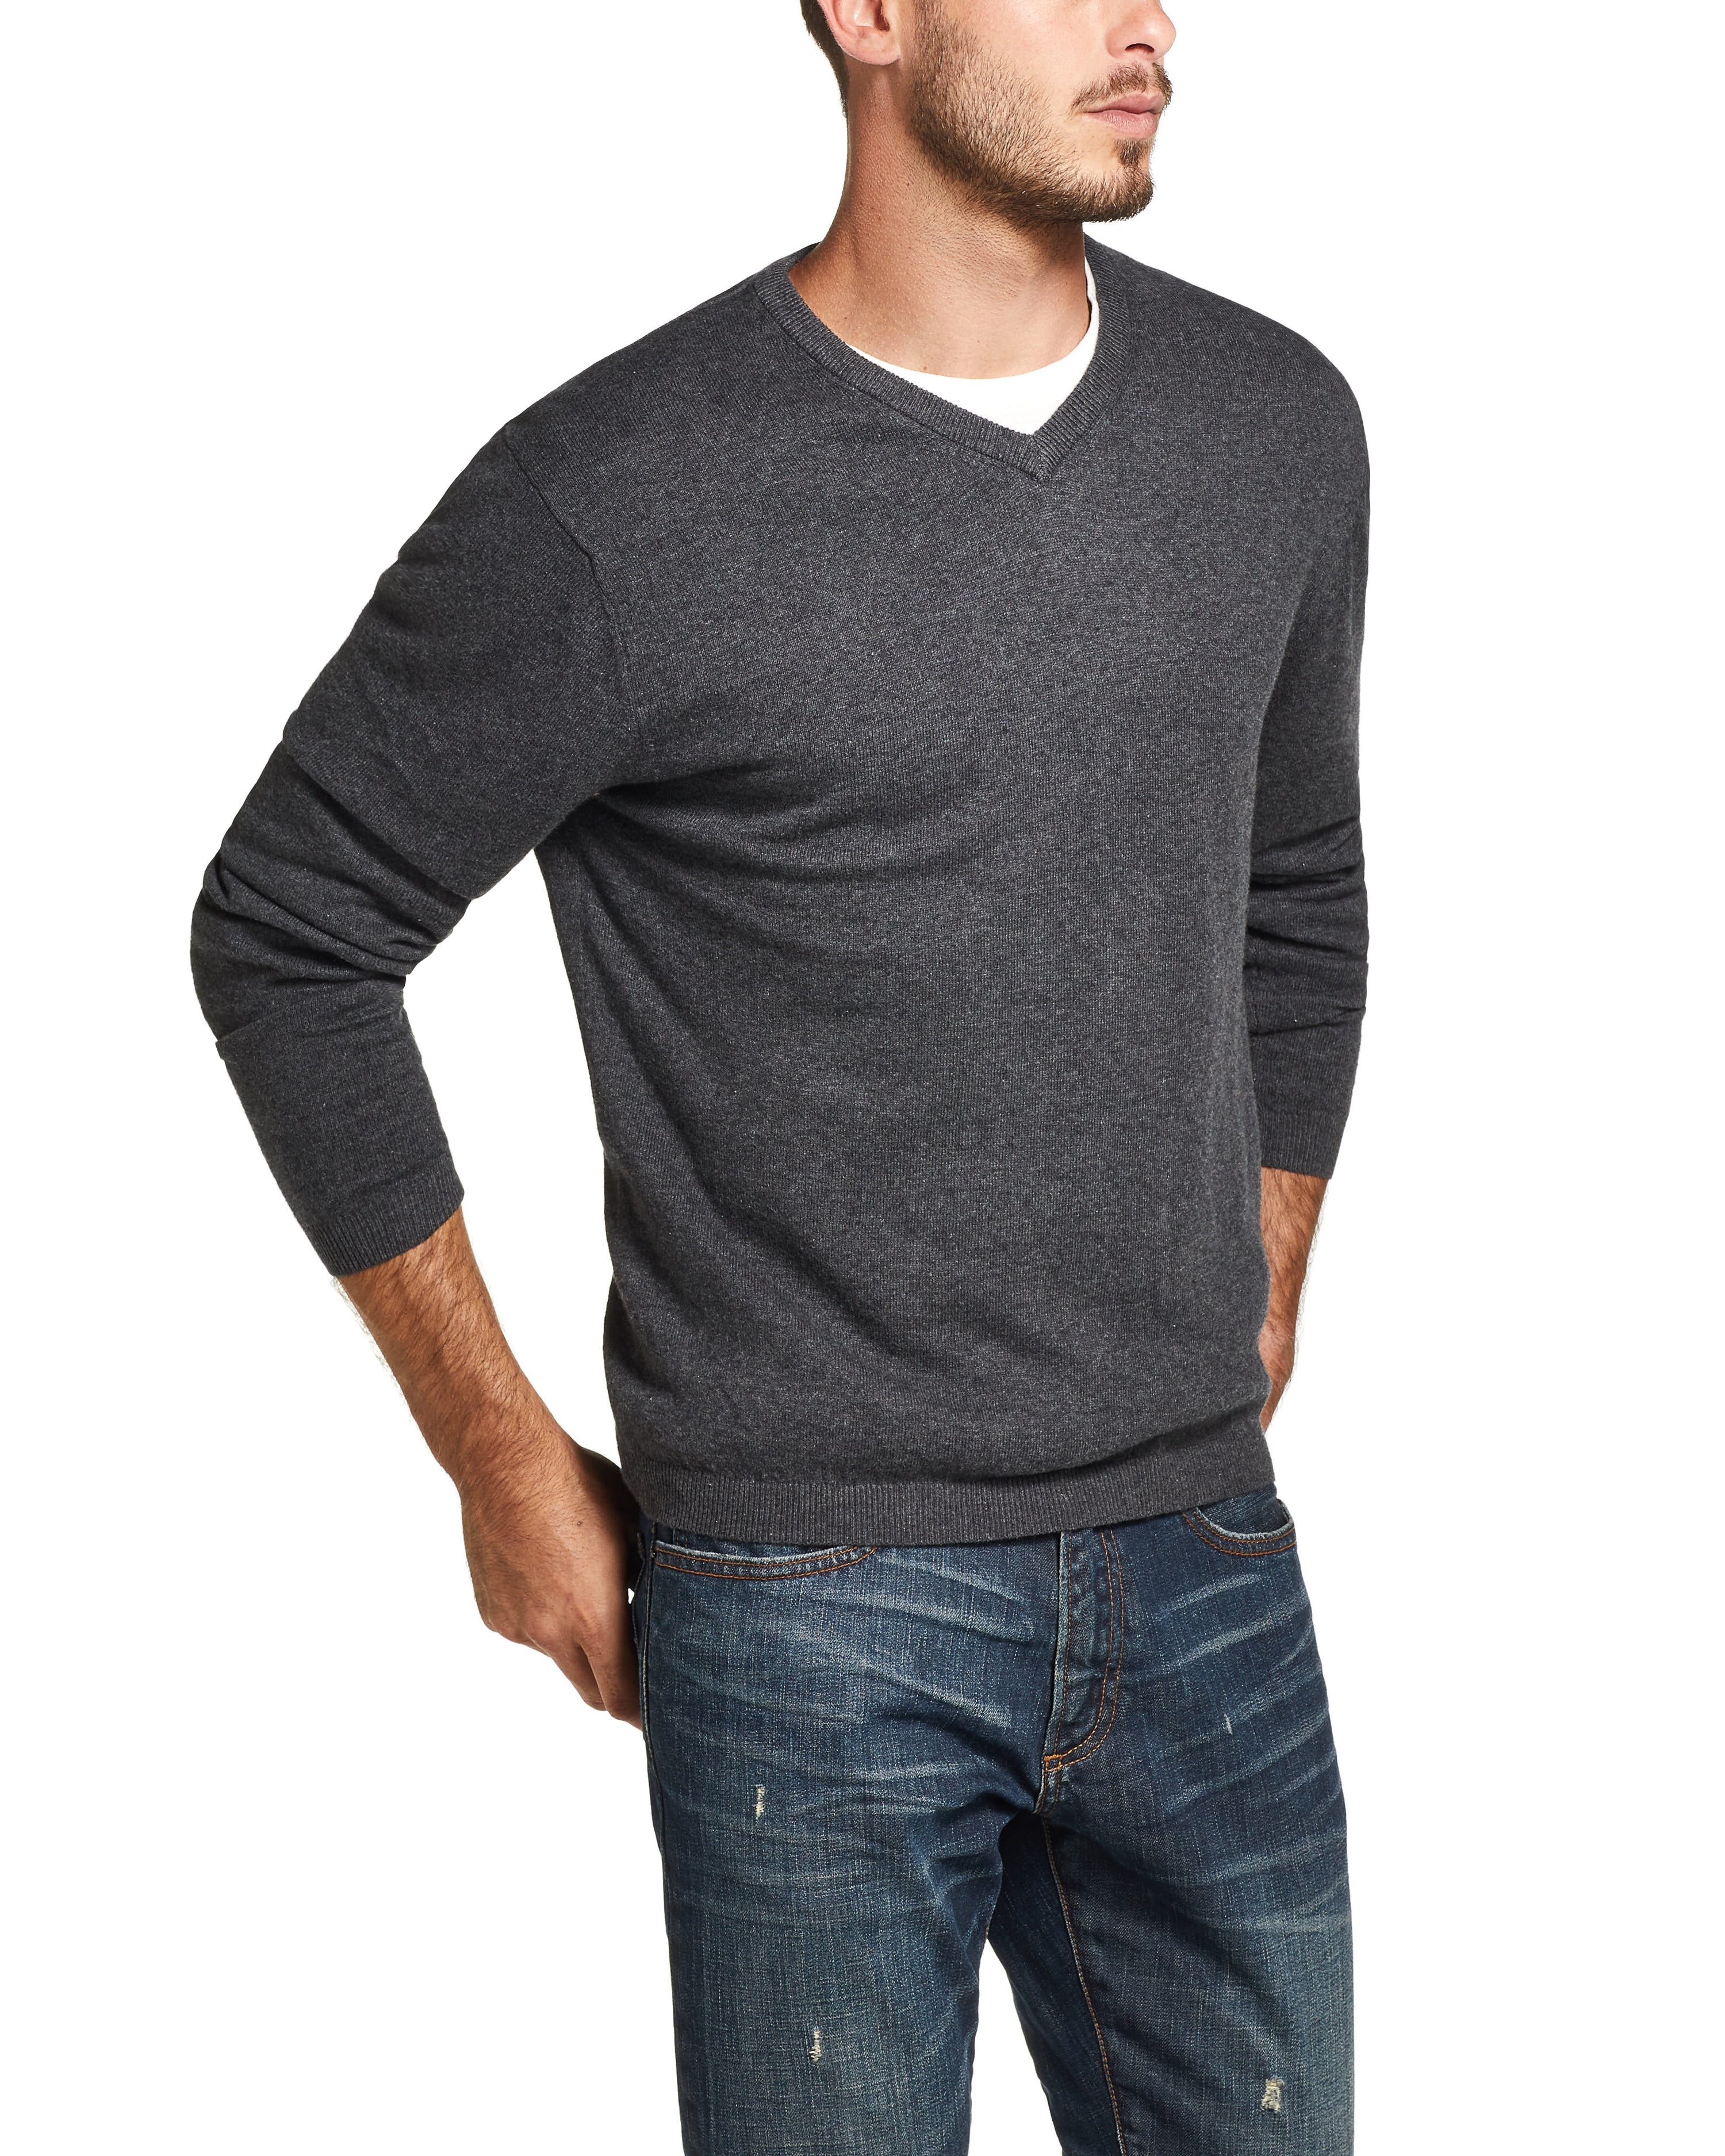 Cotton Cashmere V Neck Sweater in Charcoal Heather